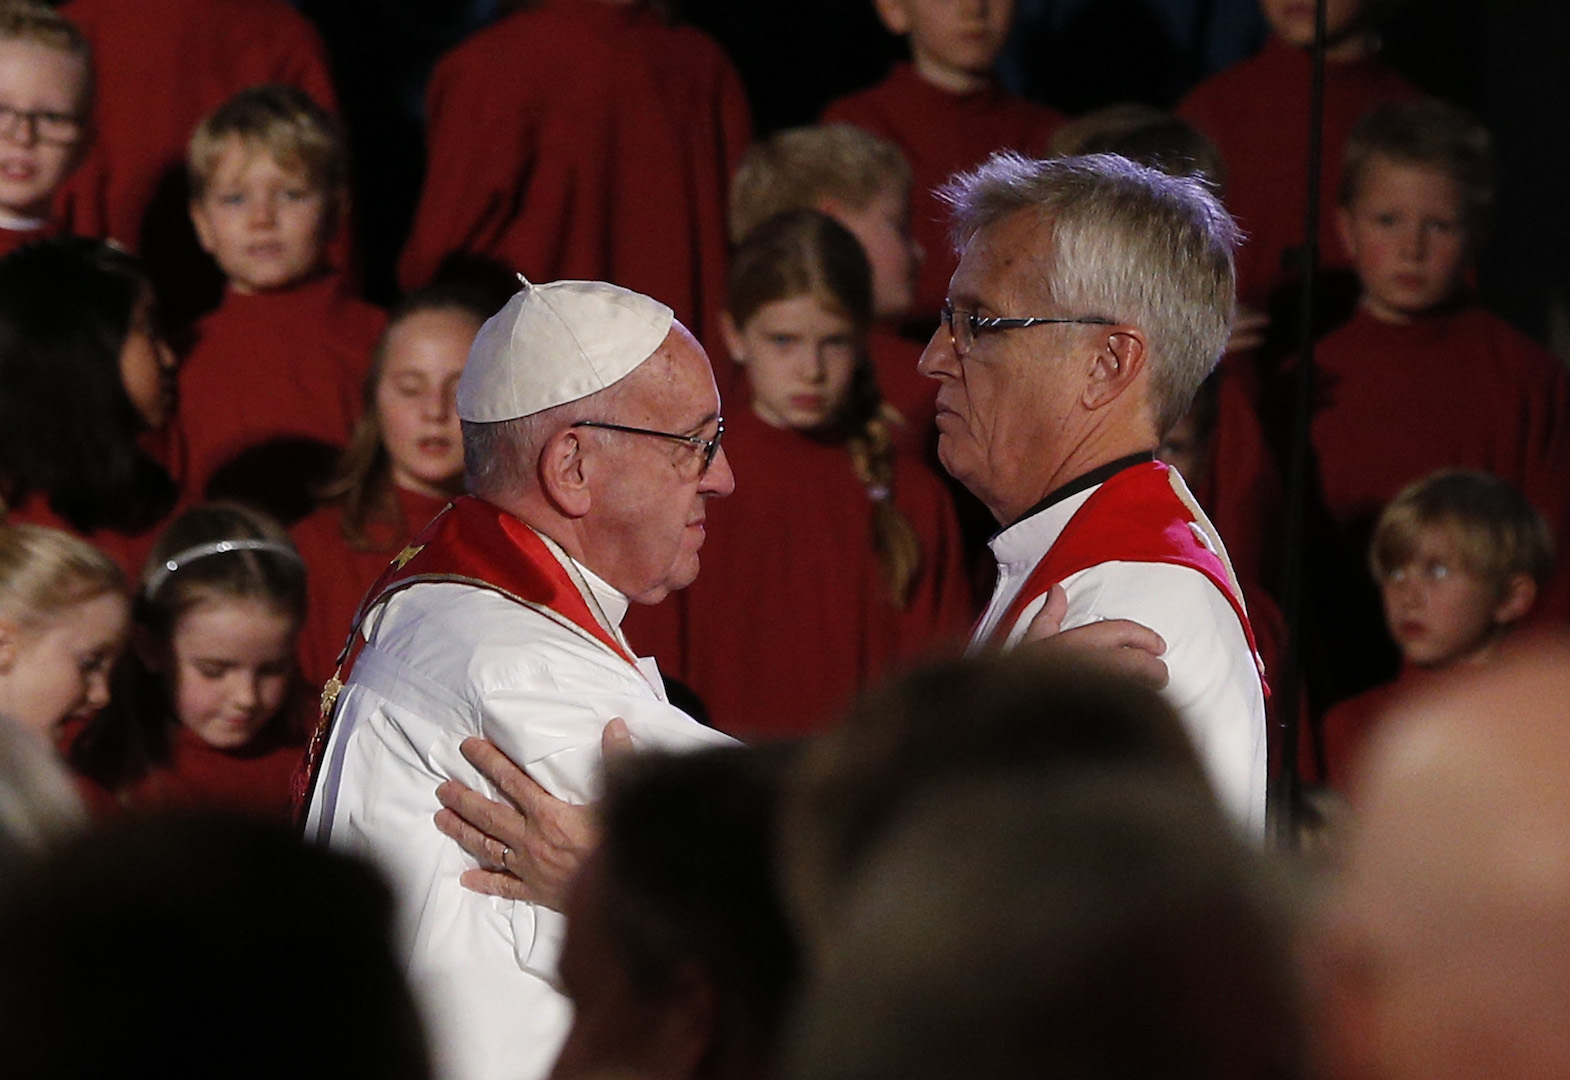 Pope Francis embraces the Rev. Martin Junge, general secretary of the Lutheran World Federation, during an ecumenical prayer service at the Lutheran cathedral in Lund, Sweden, Oct. 31. (CNS photo/Paul Haring)